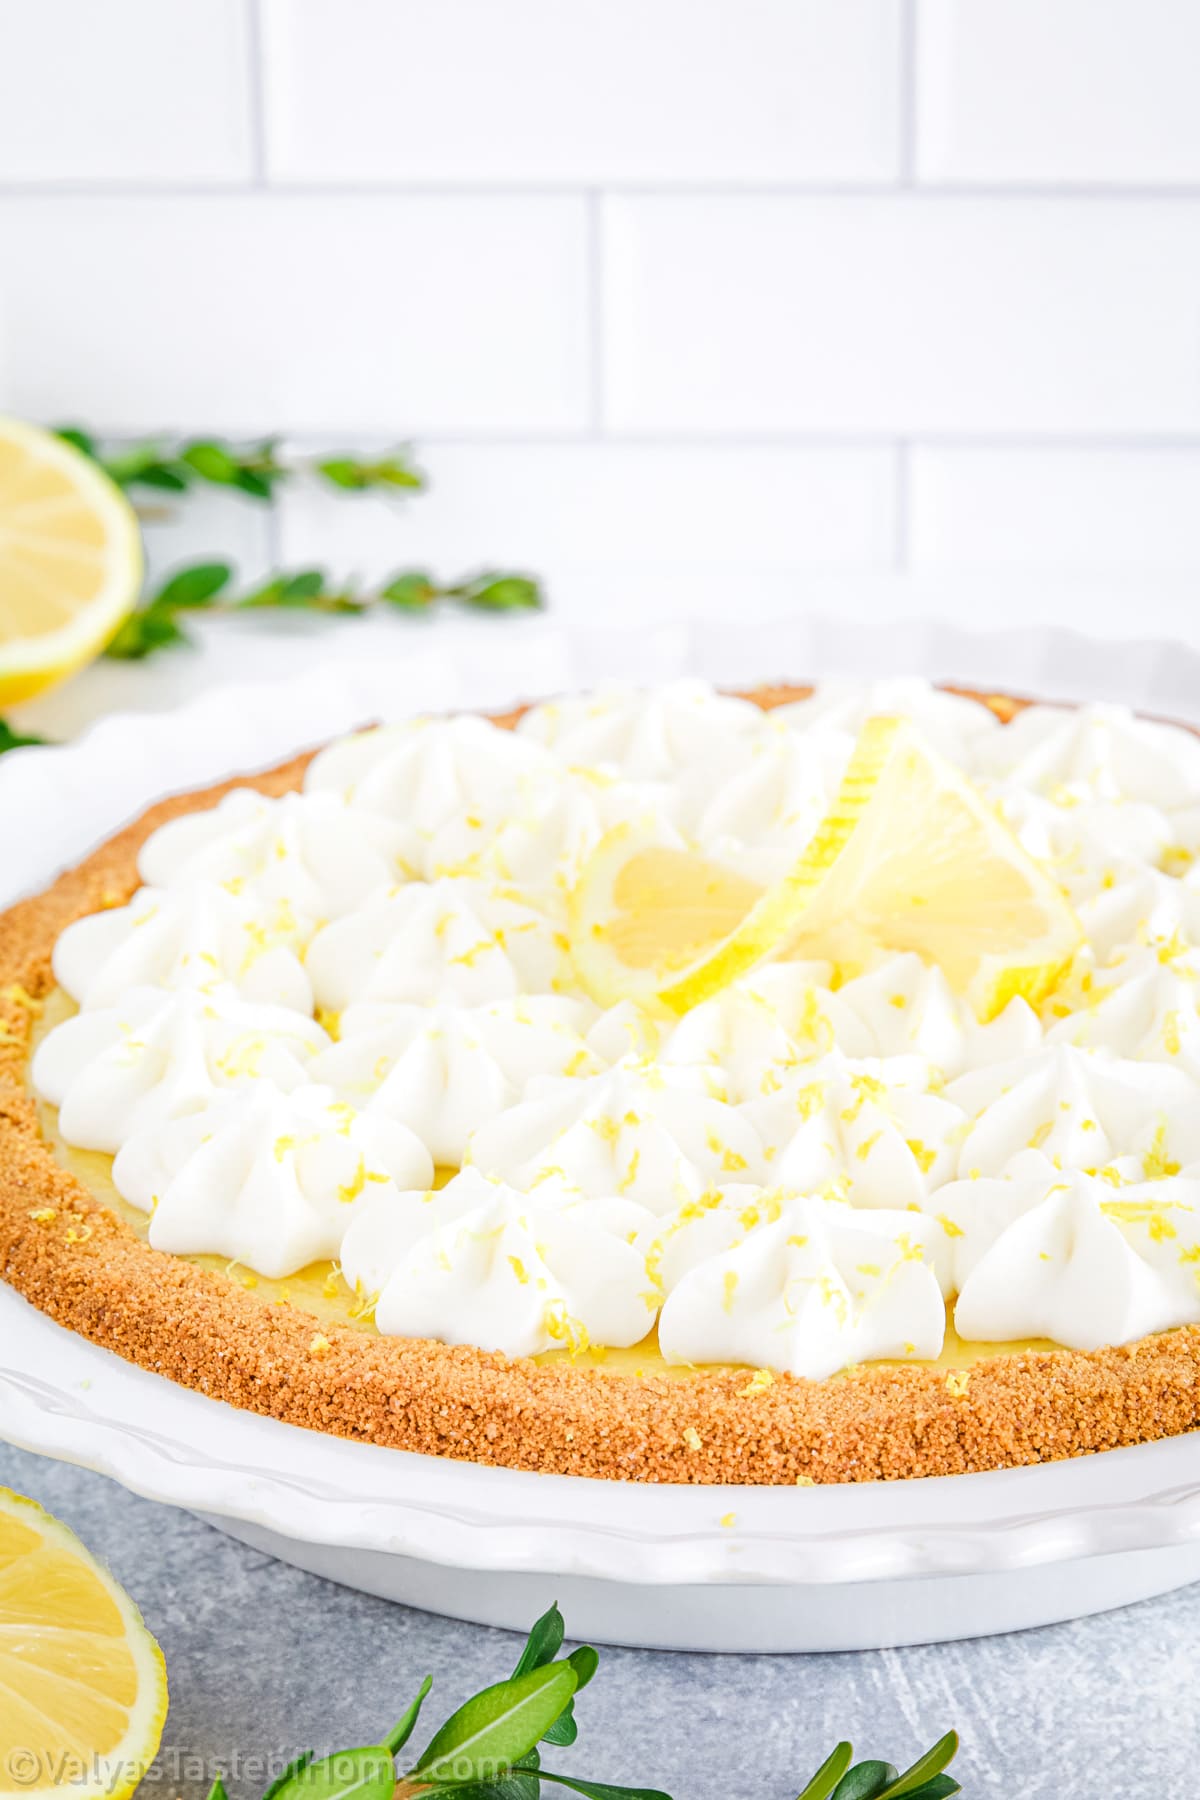 Lemon pie is a type of dessert pie that typically consists of a lemon-flavored filling made from fresh lemon juice, sweetened condensed milk, and egg yolks, which are all baked in a pastry crust. It’s similar to a key lime pie but even better!